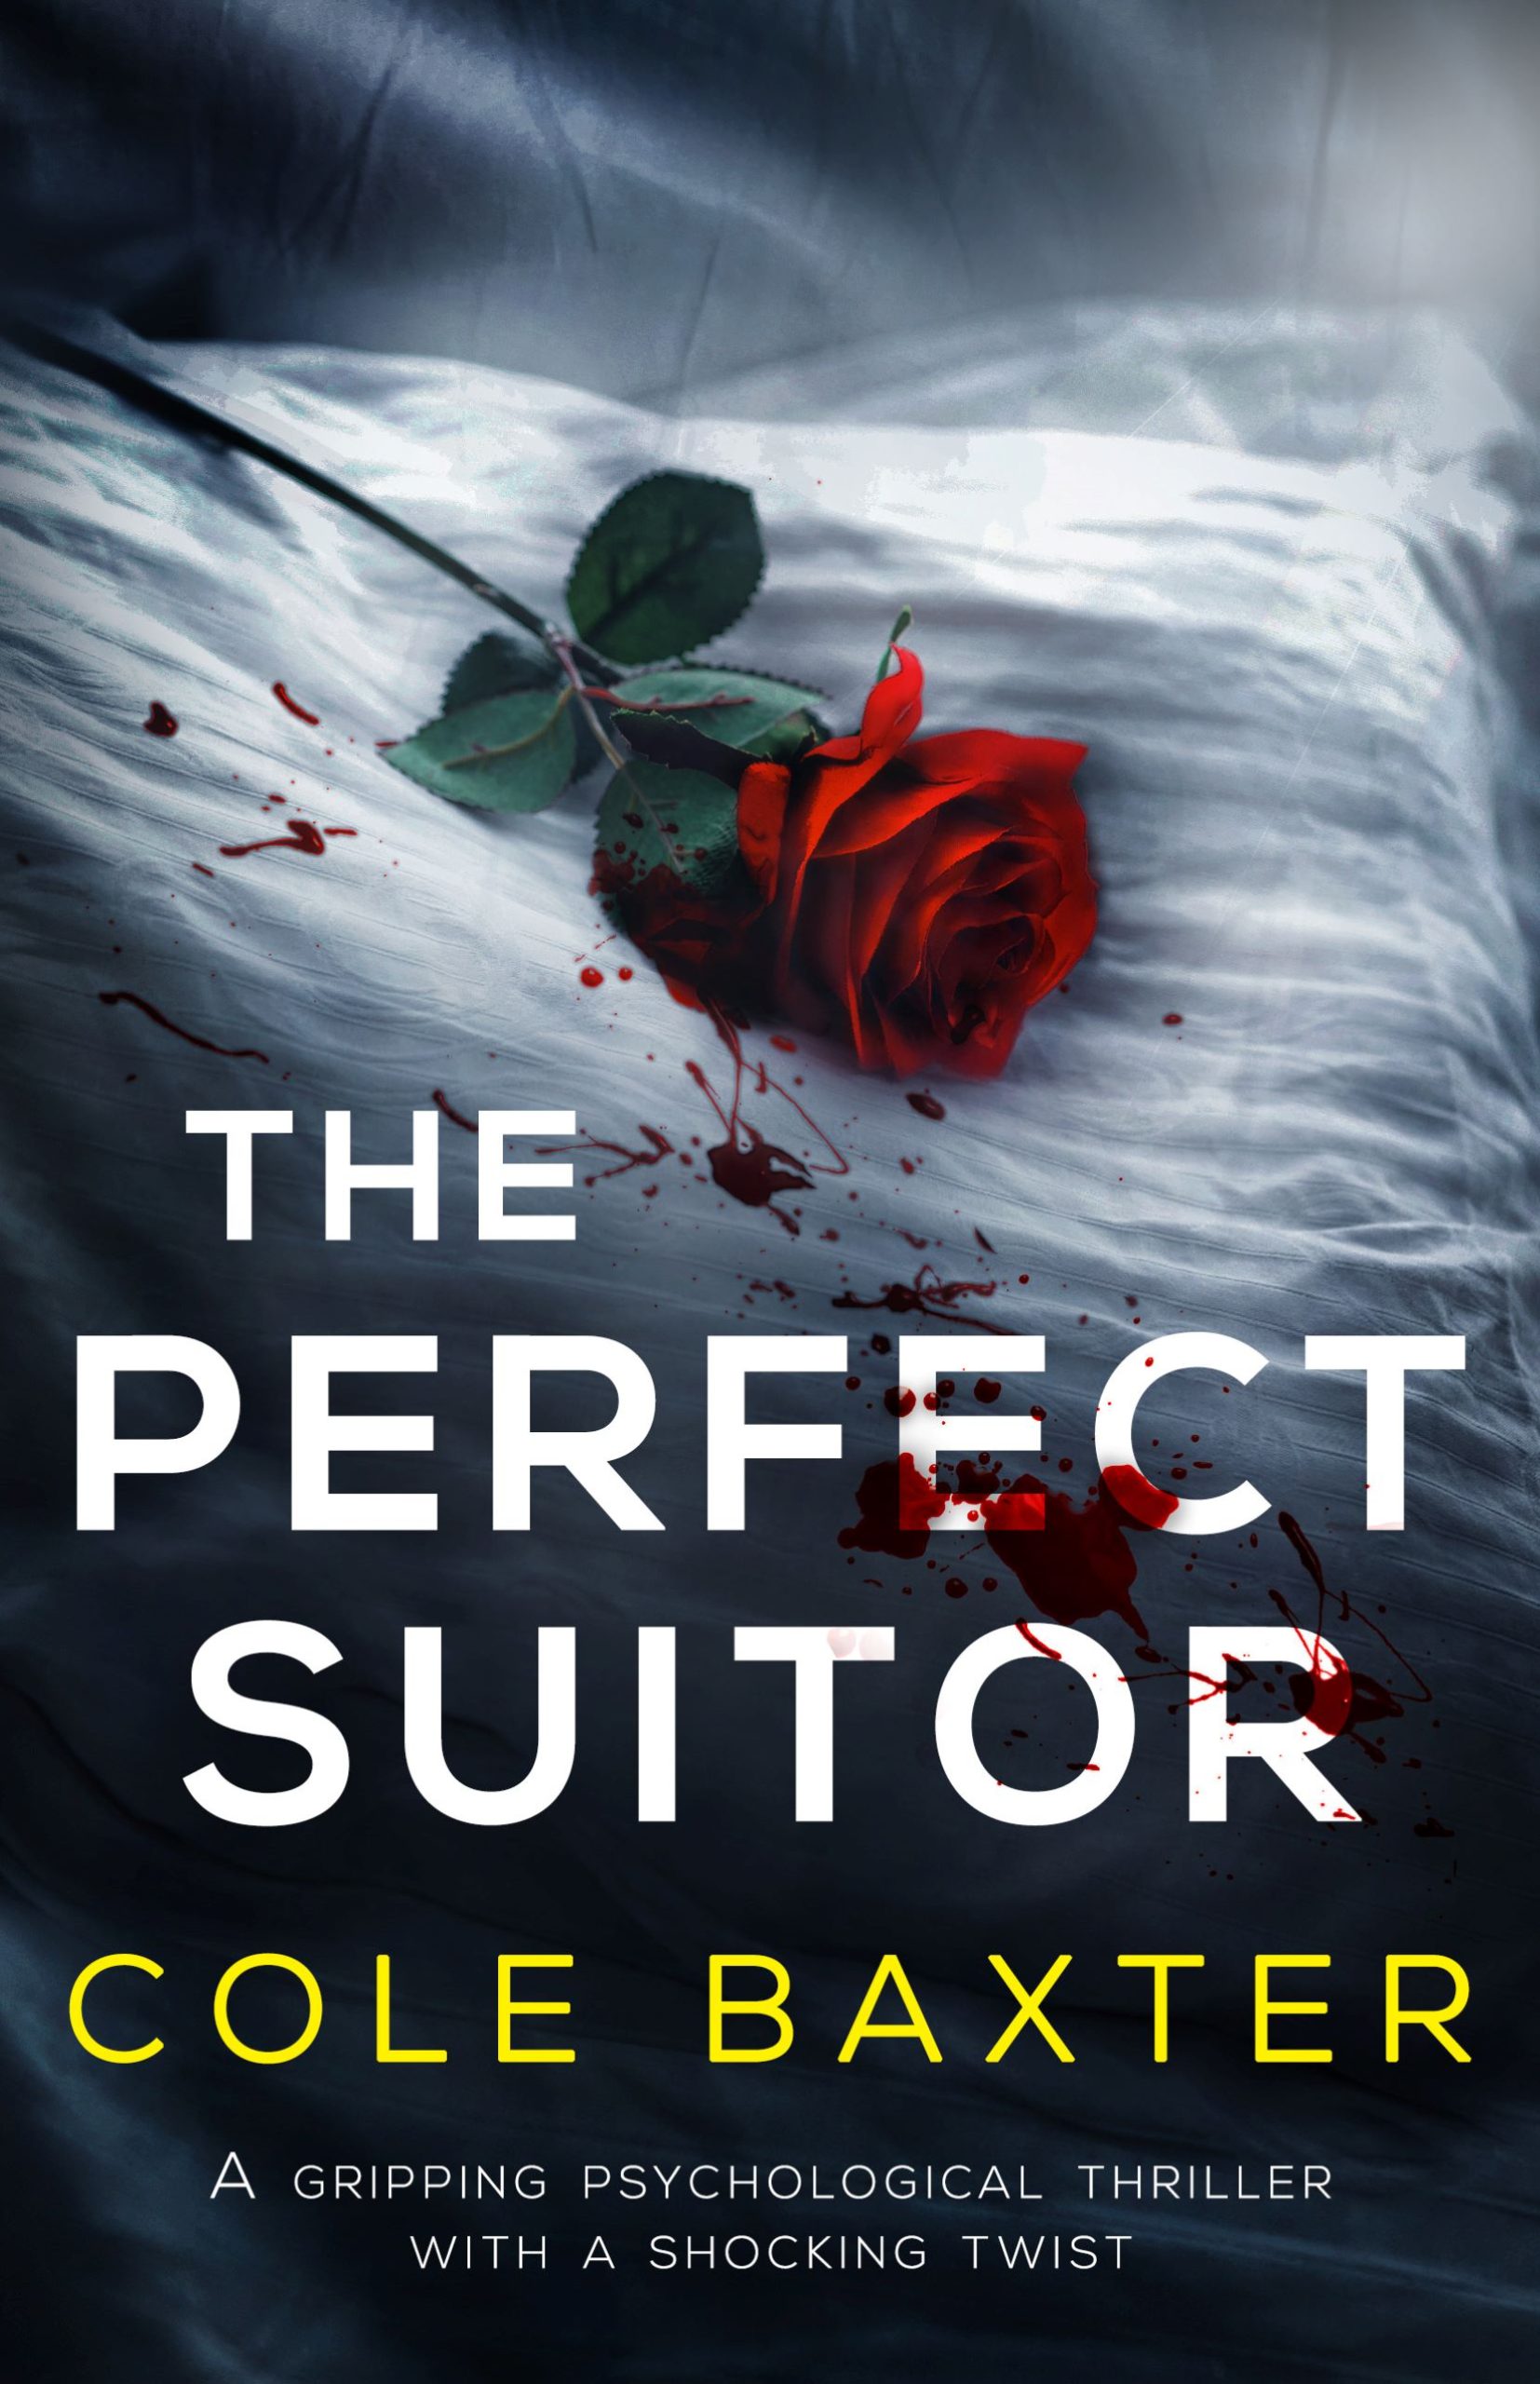 COLE BAXTER NEW RELEASE – THE PERFECT SUITOR